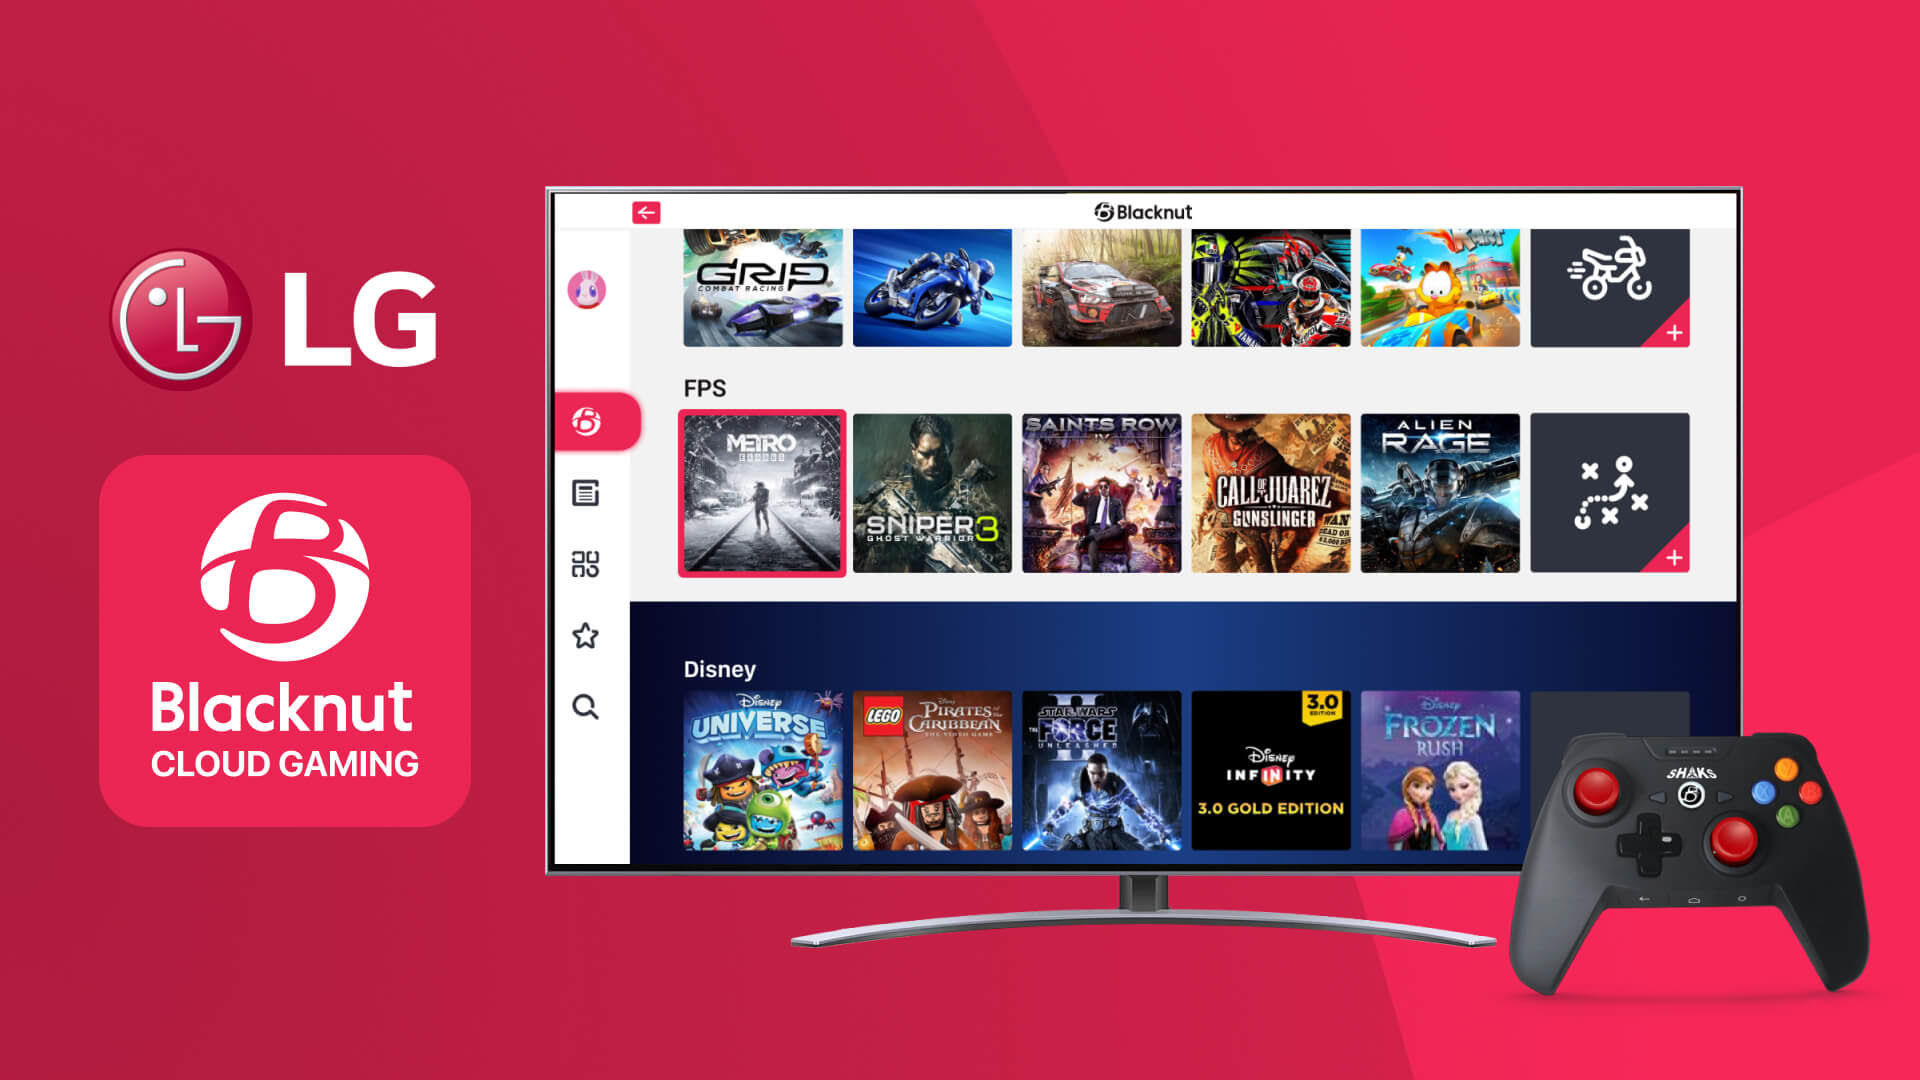 LG expands further into cloud gaming for smart TVs - Digital TV Europe